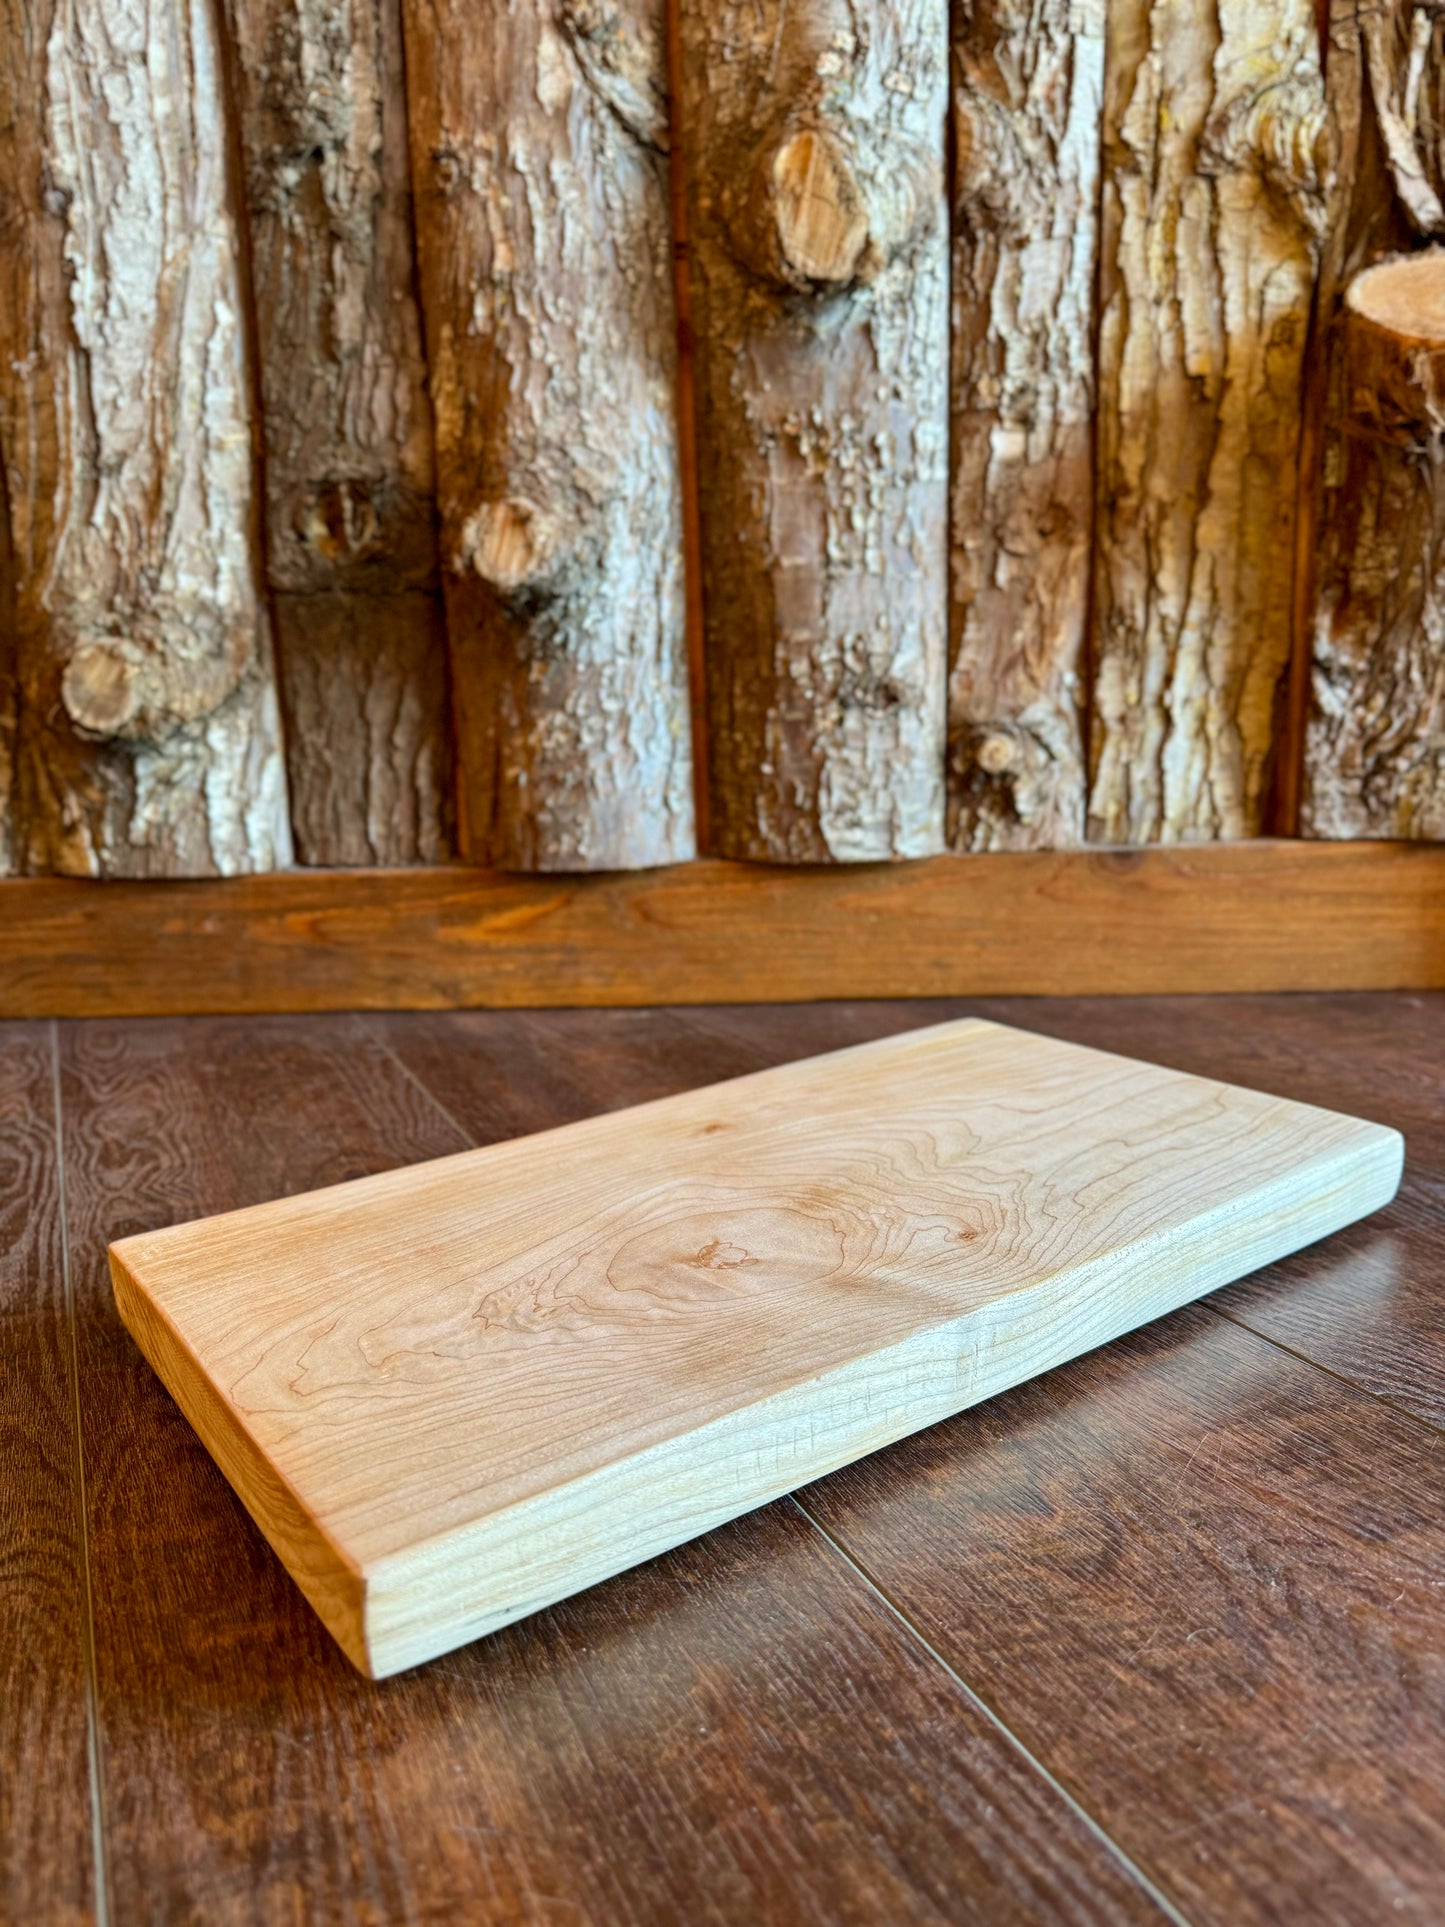 ITEM 132: LOCALLY-MADE cutting boards